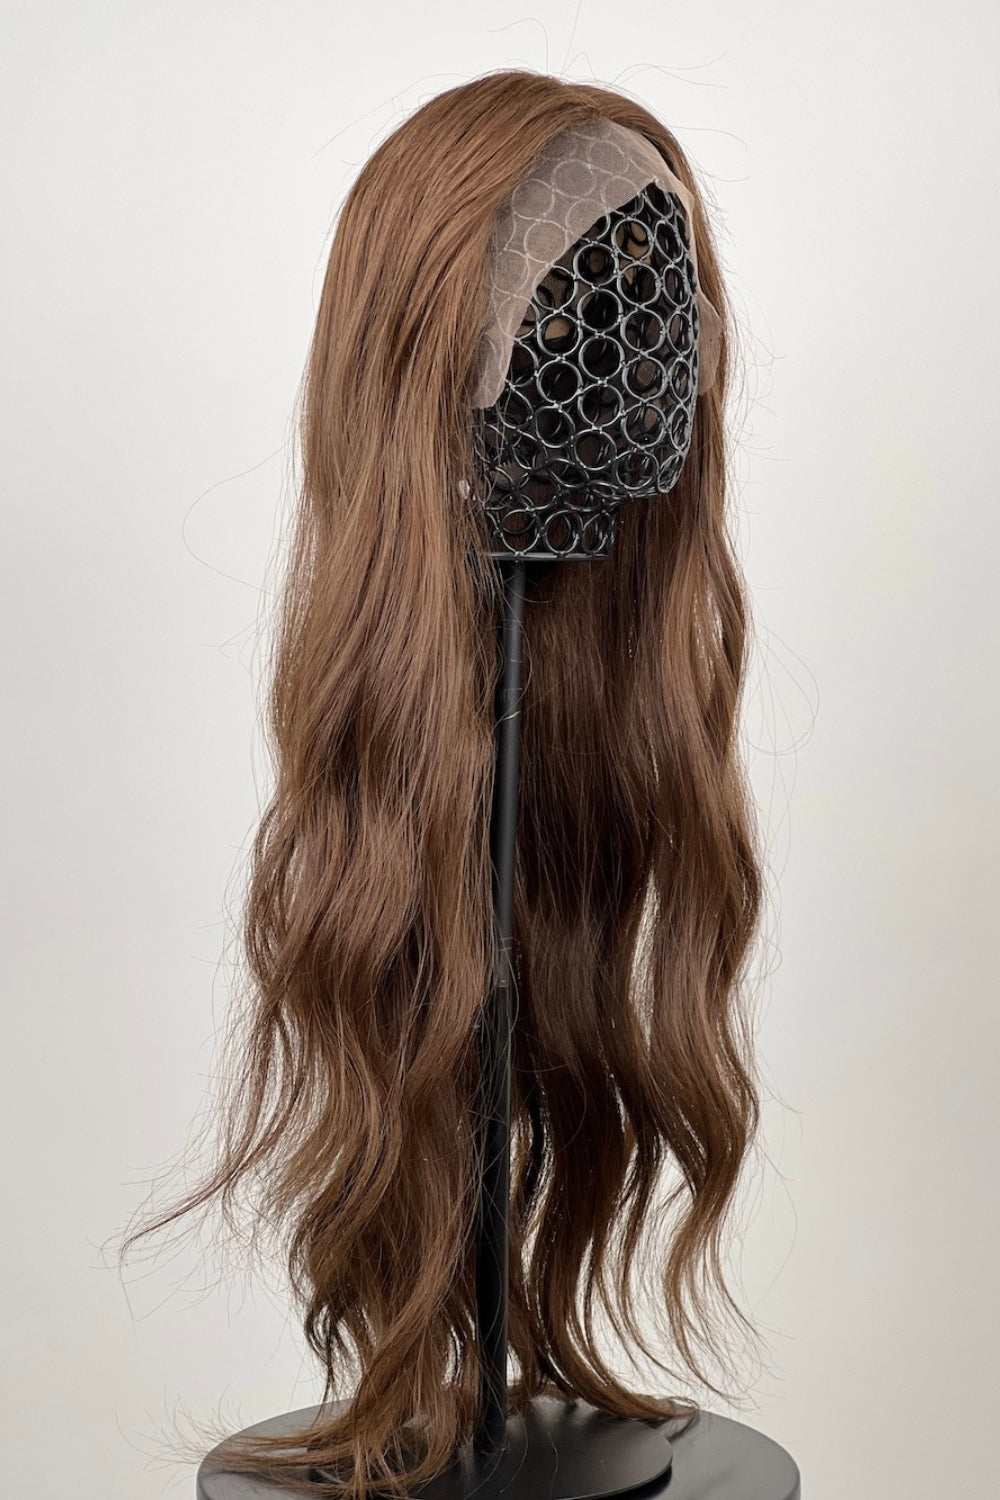 The wig is made with 100% human hair and comes in 60 cm. It has a mix of 3 colors to create a deep, warm and perfect brown.